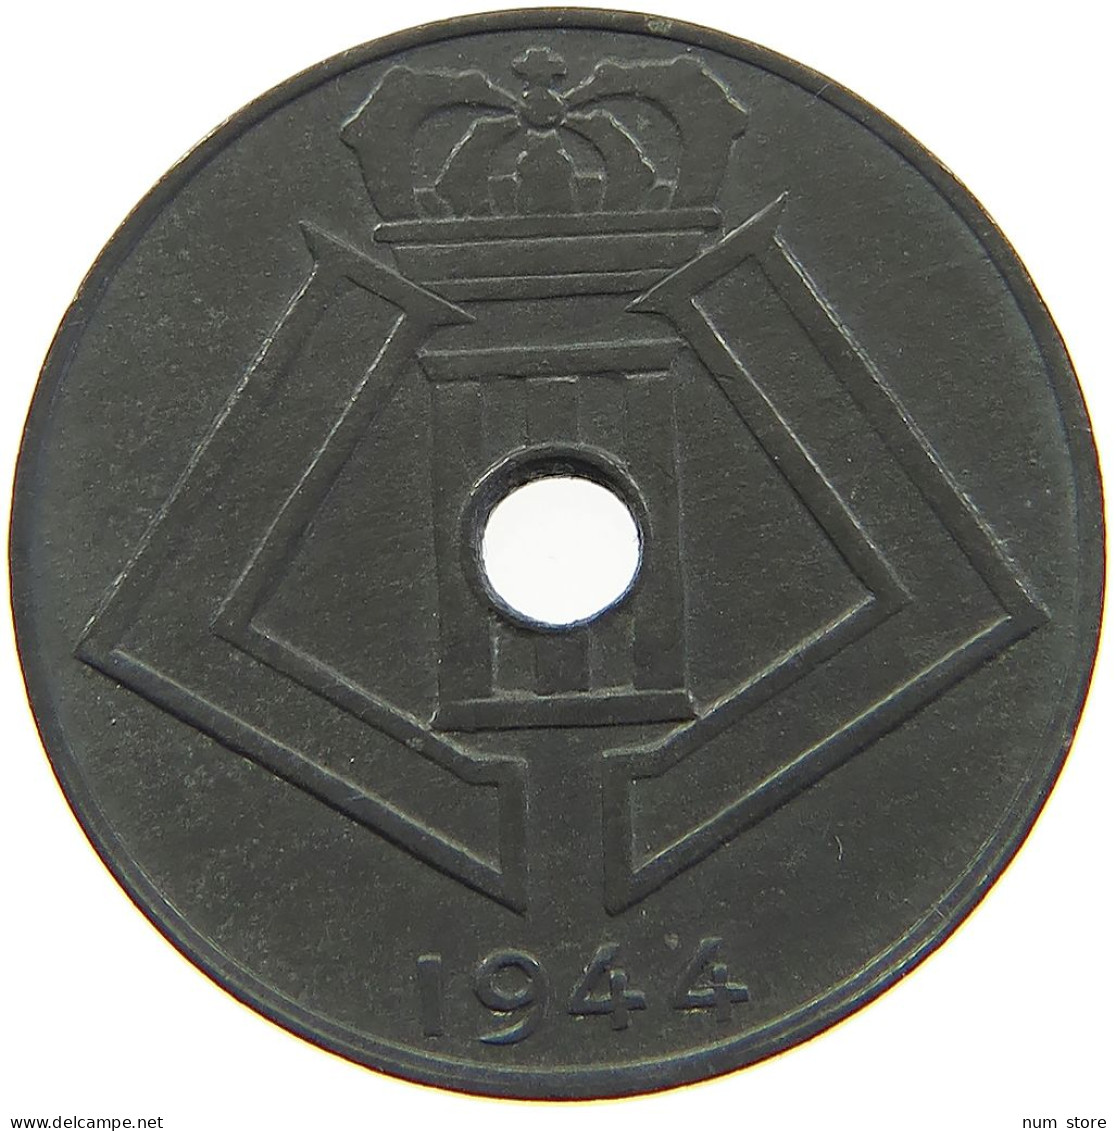 BELGIUM 10 CENTIMES 1944 LEOPOLD III. (1934-1951) #a086 0459 - 10 Centimes